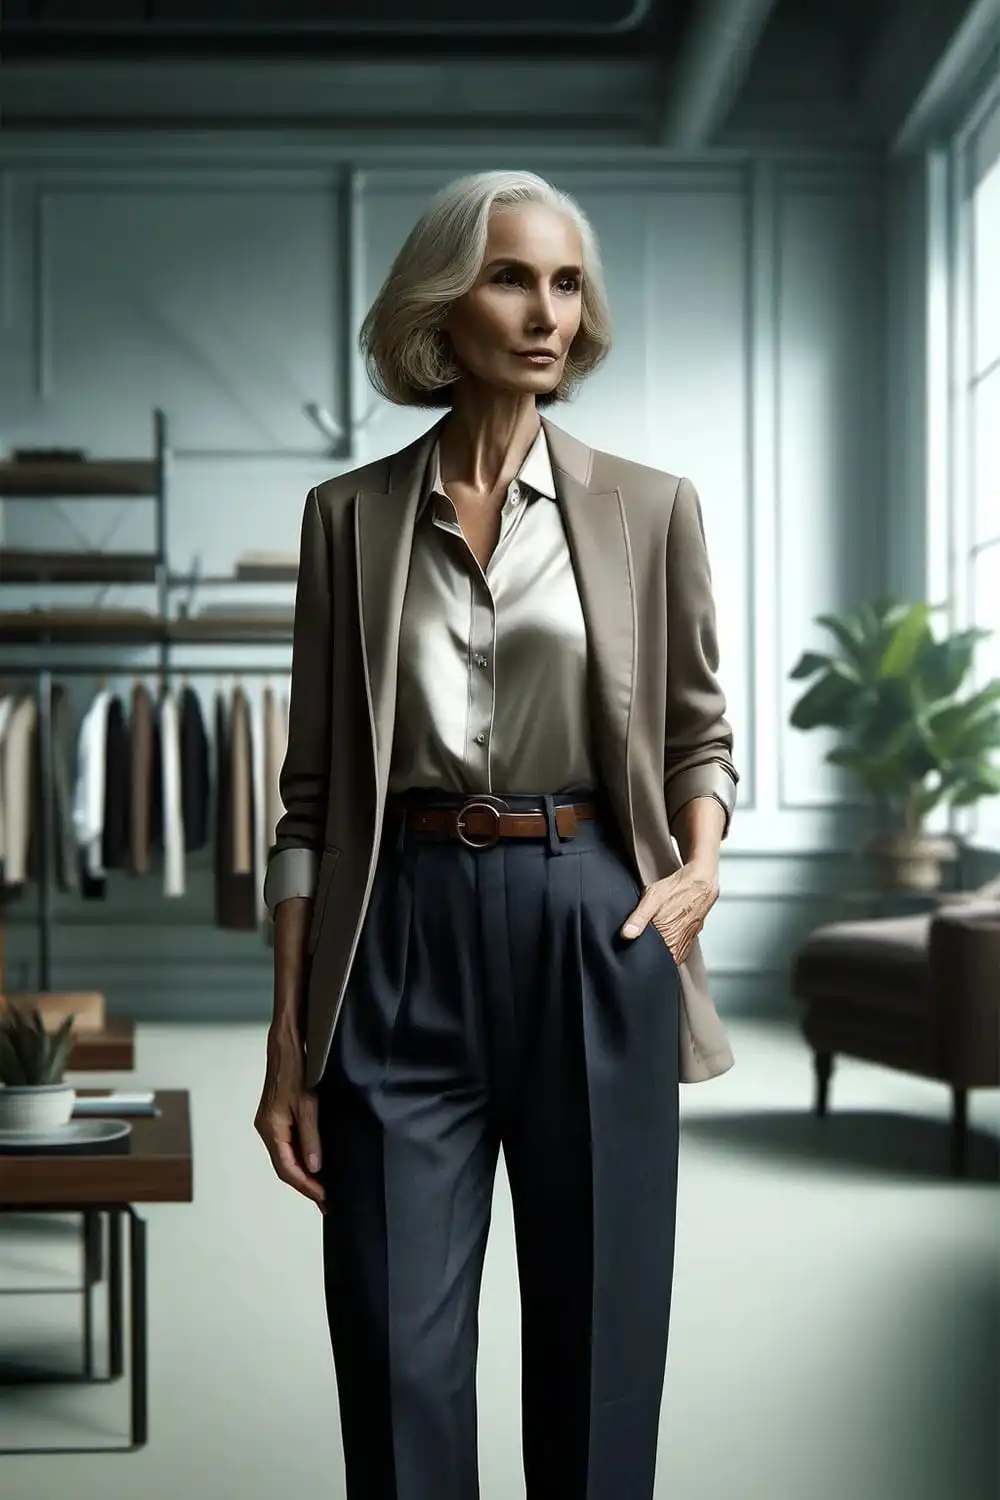 Fashionable older woman wearing blouse, blazer, and twill pants.